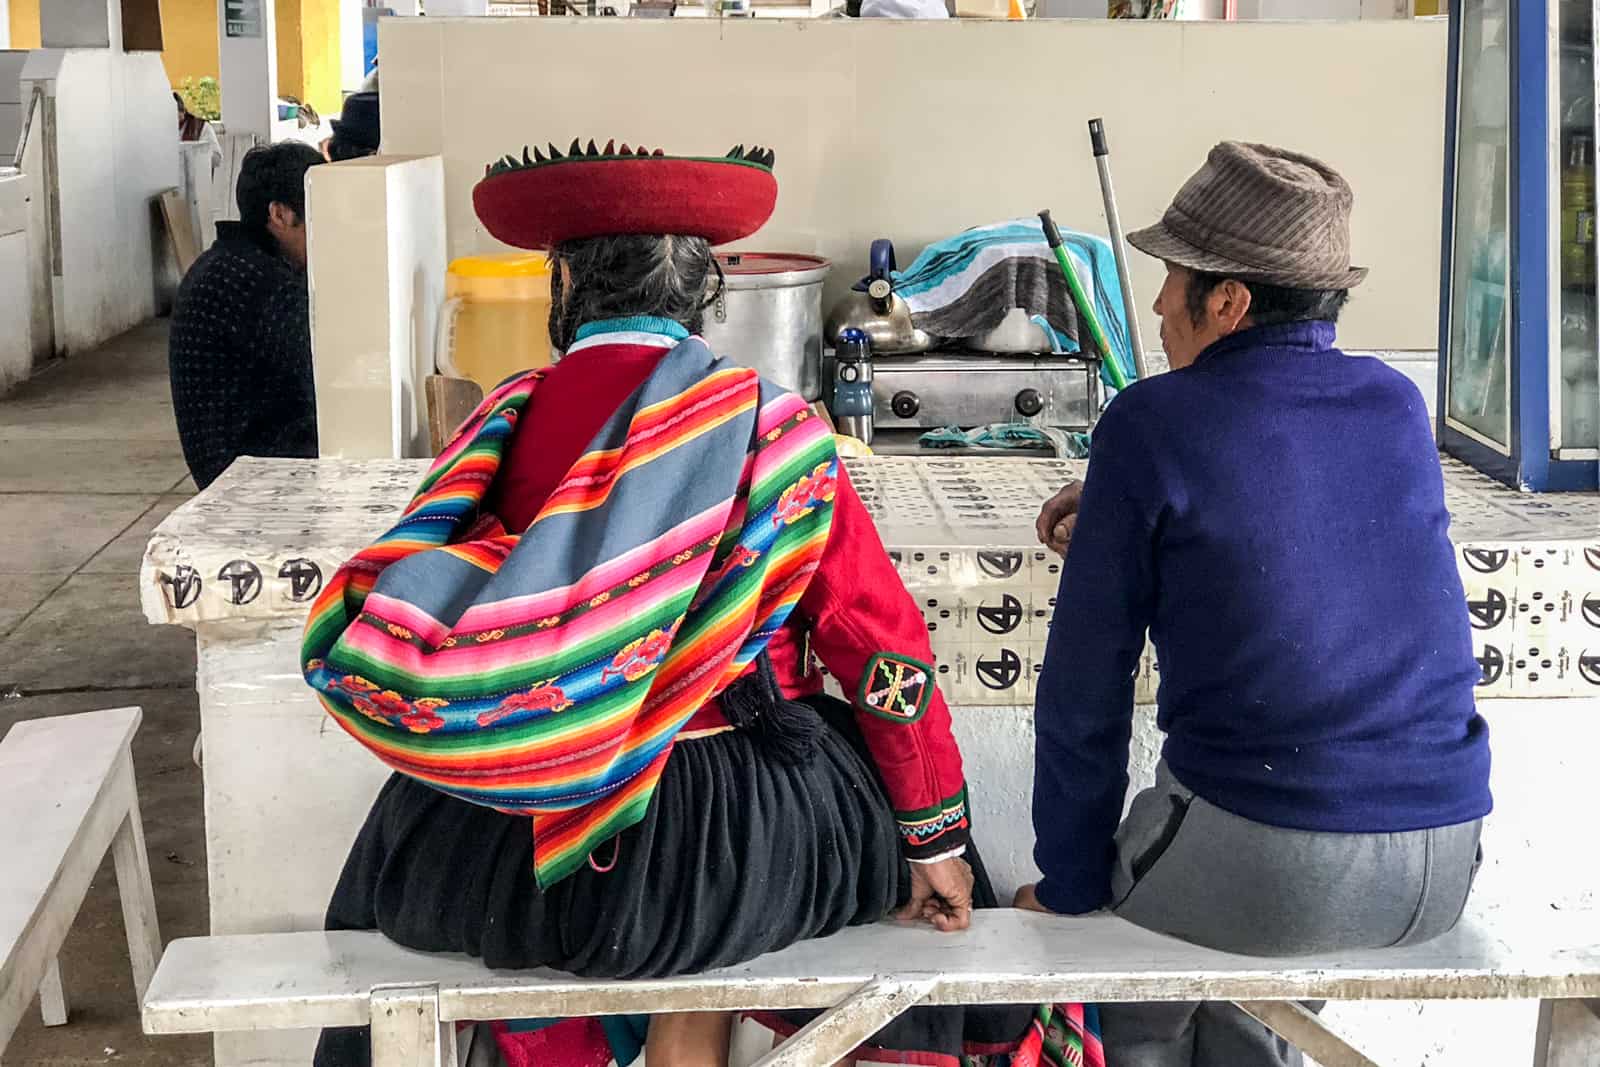 A Peruvian couple (the woman in traditional woven clothing and a red hat) eating in a market in Cusco, Peru.